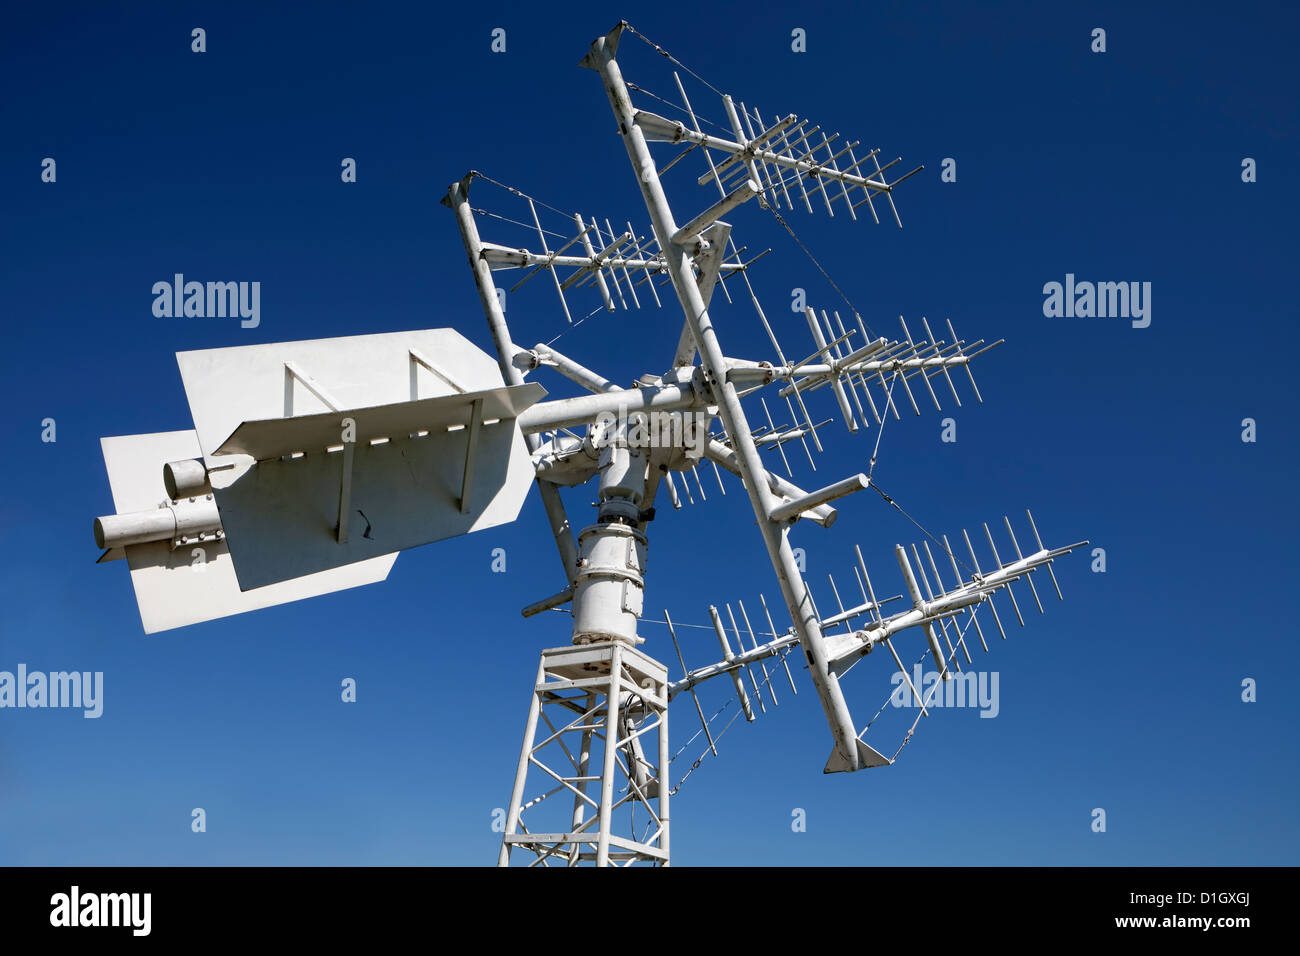 High-frequency antenna from ESA, European Space Agency, 1980s, Euro Space Center, Transinne, Belgium, Europe Stock Photo